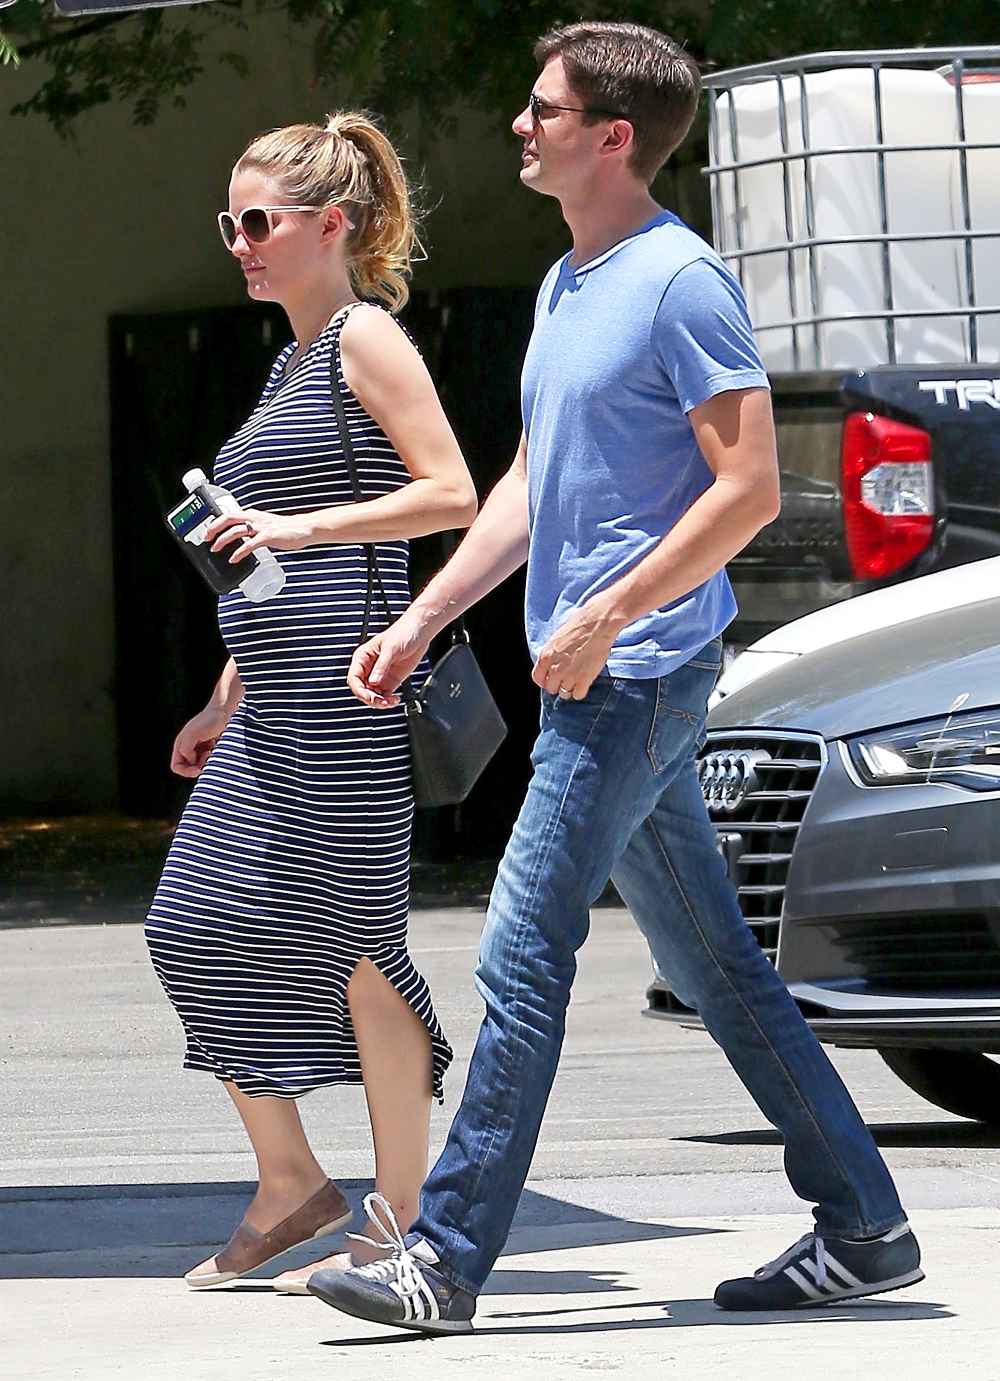 Topher Grace and Ashley Hinshaw